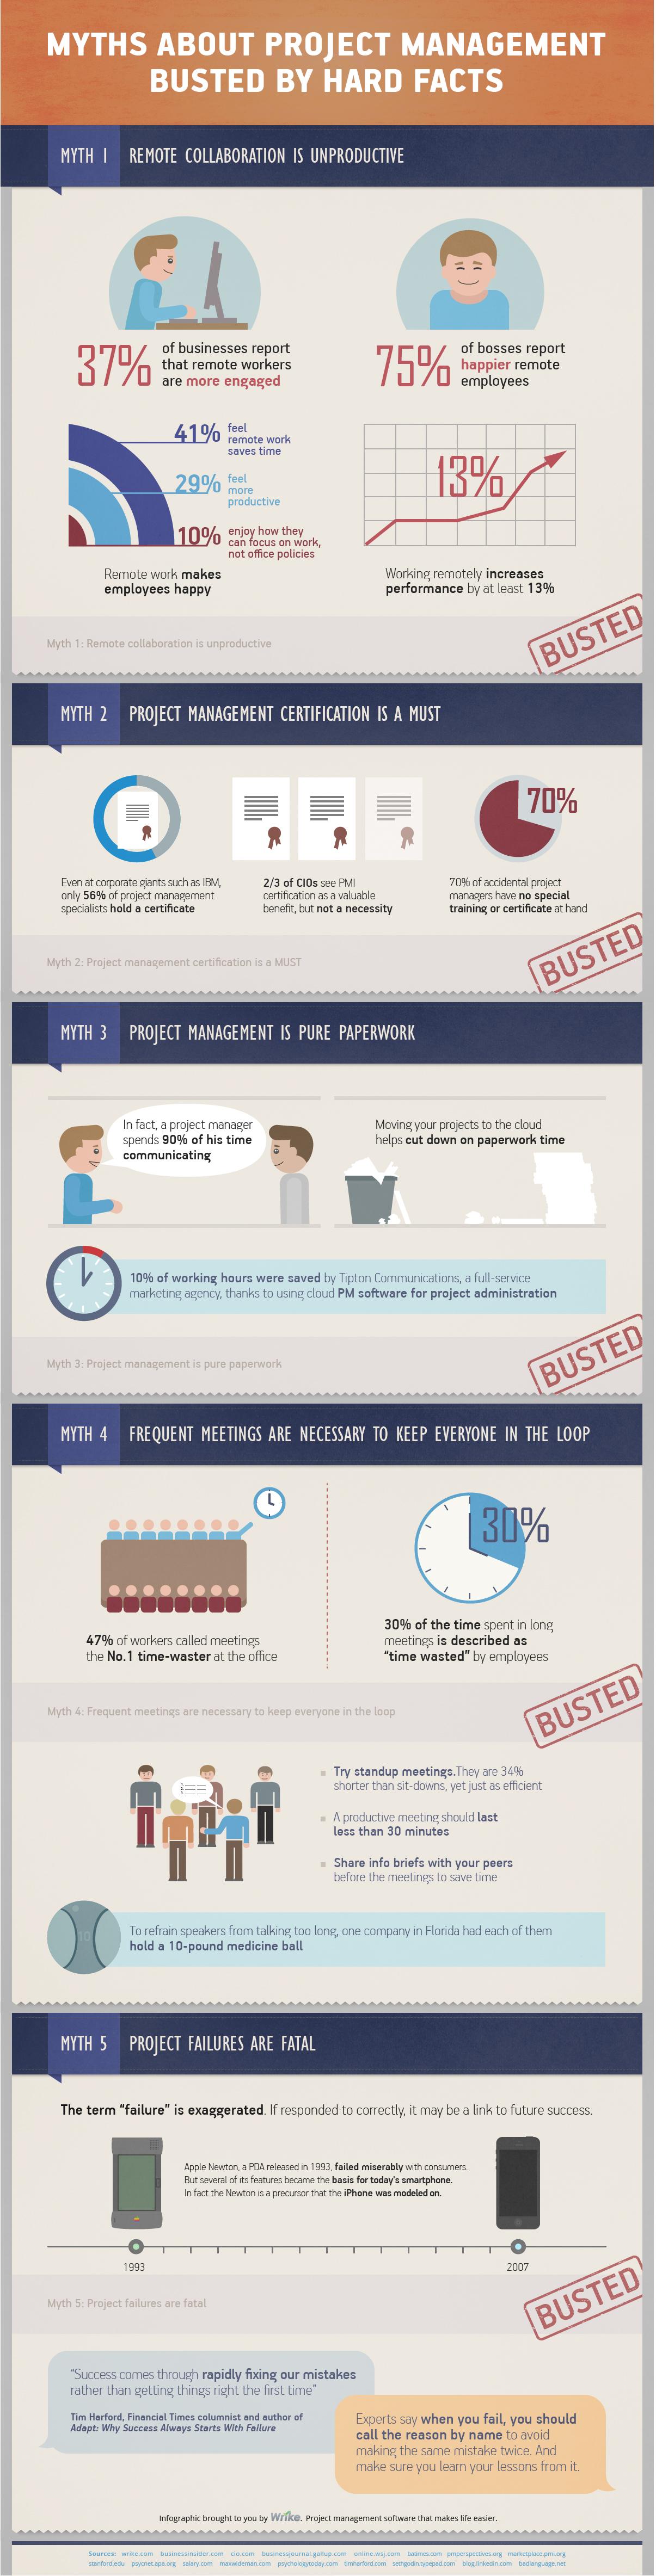 http://www.wrike.com/blog/02/12/2014/Top-Five-Project-Management-Myths-Busted-NEW-INFOGRAPHIC